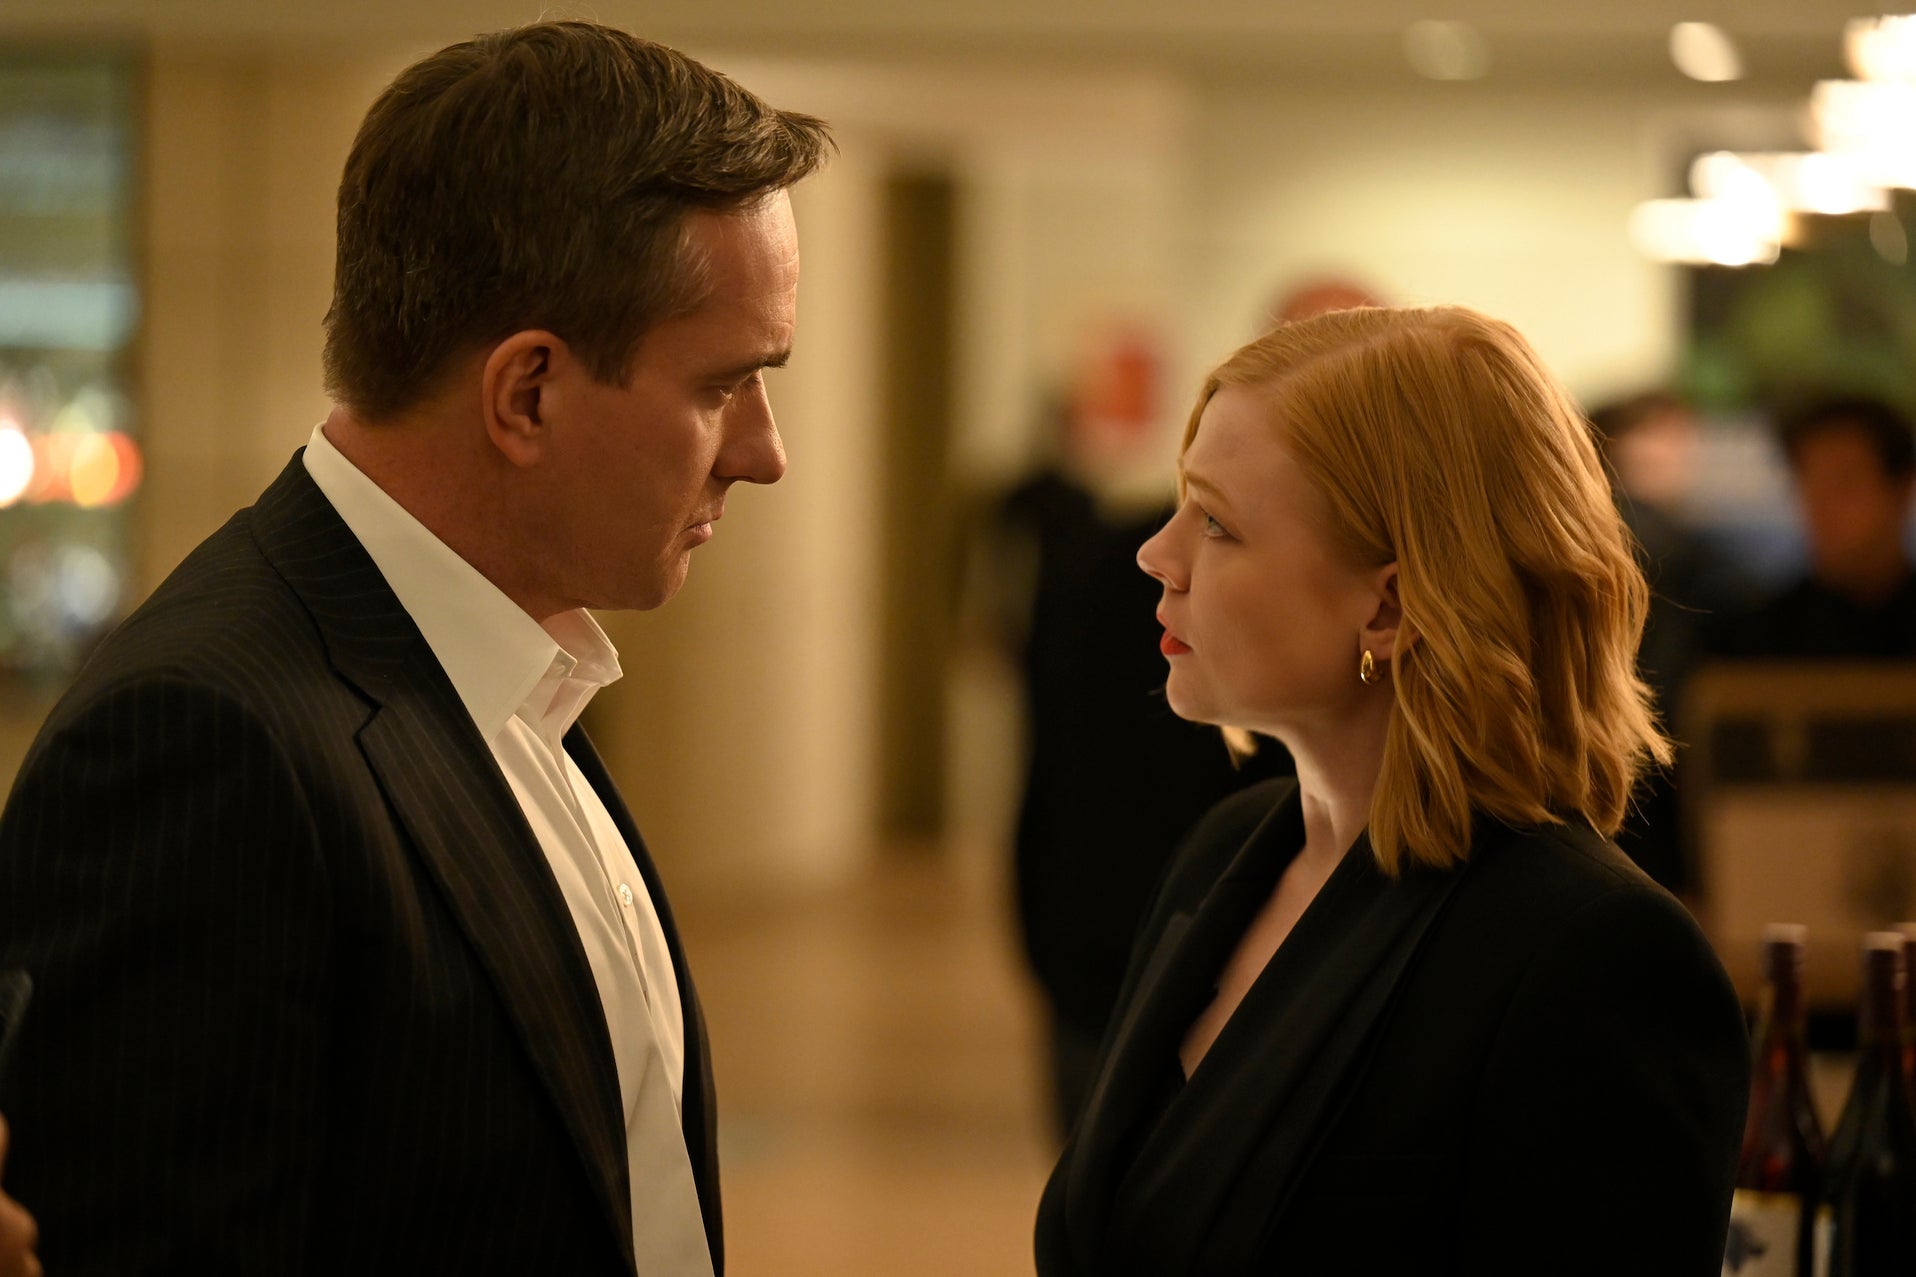 Tom Wambsgans (Matthew Macfadyen) and Shiv Roy (Sarah Snook) are dressed up in nearly matching black blazers, in a formal setting with wine bottles behind them, giving an intense and not entirely happy look.